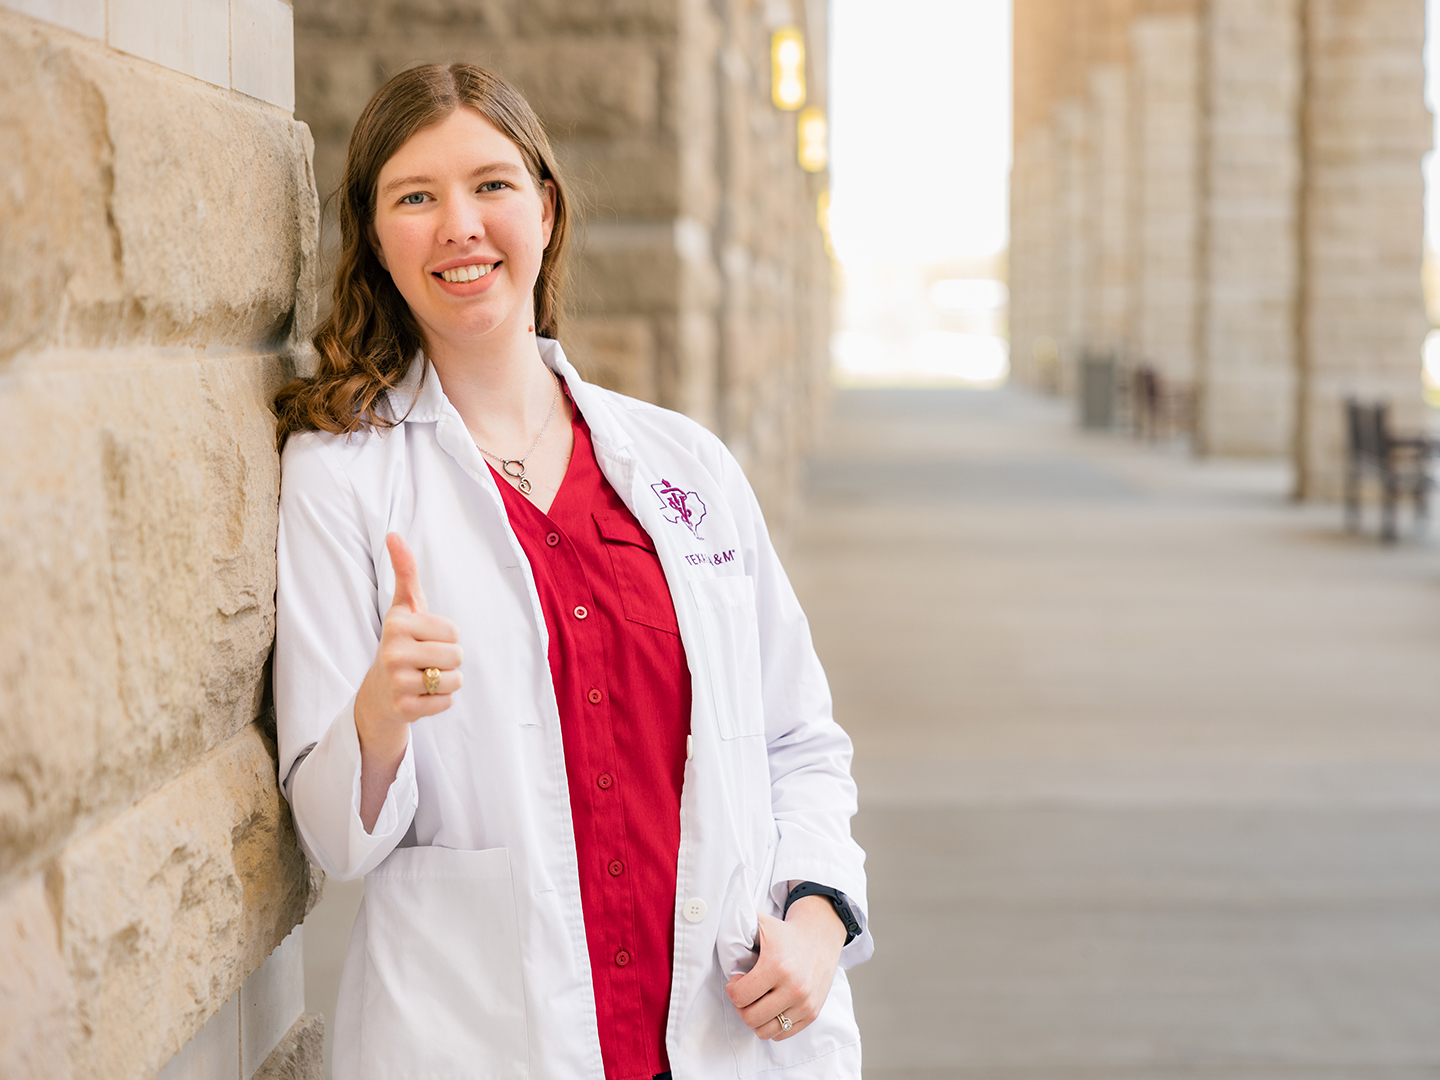 Guenther in her white coat doing gig 'em